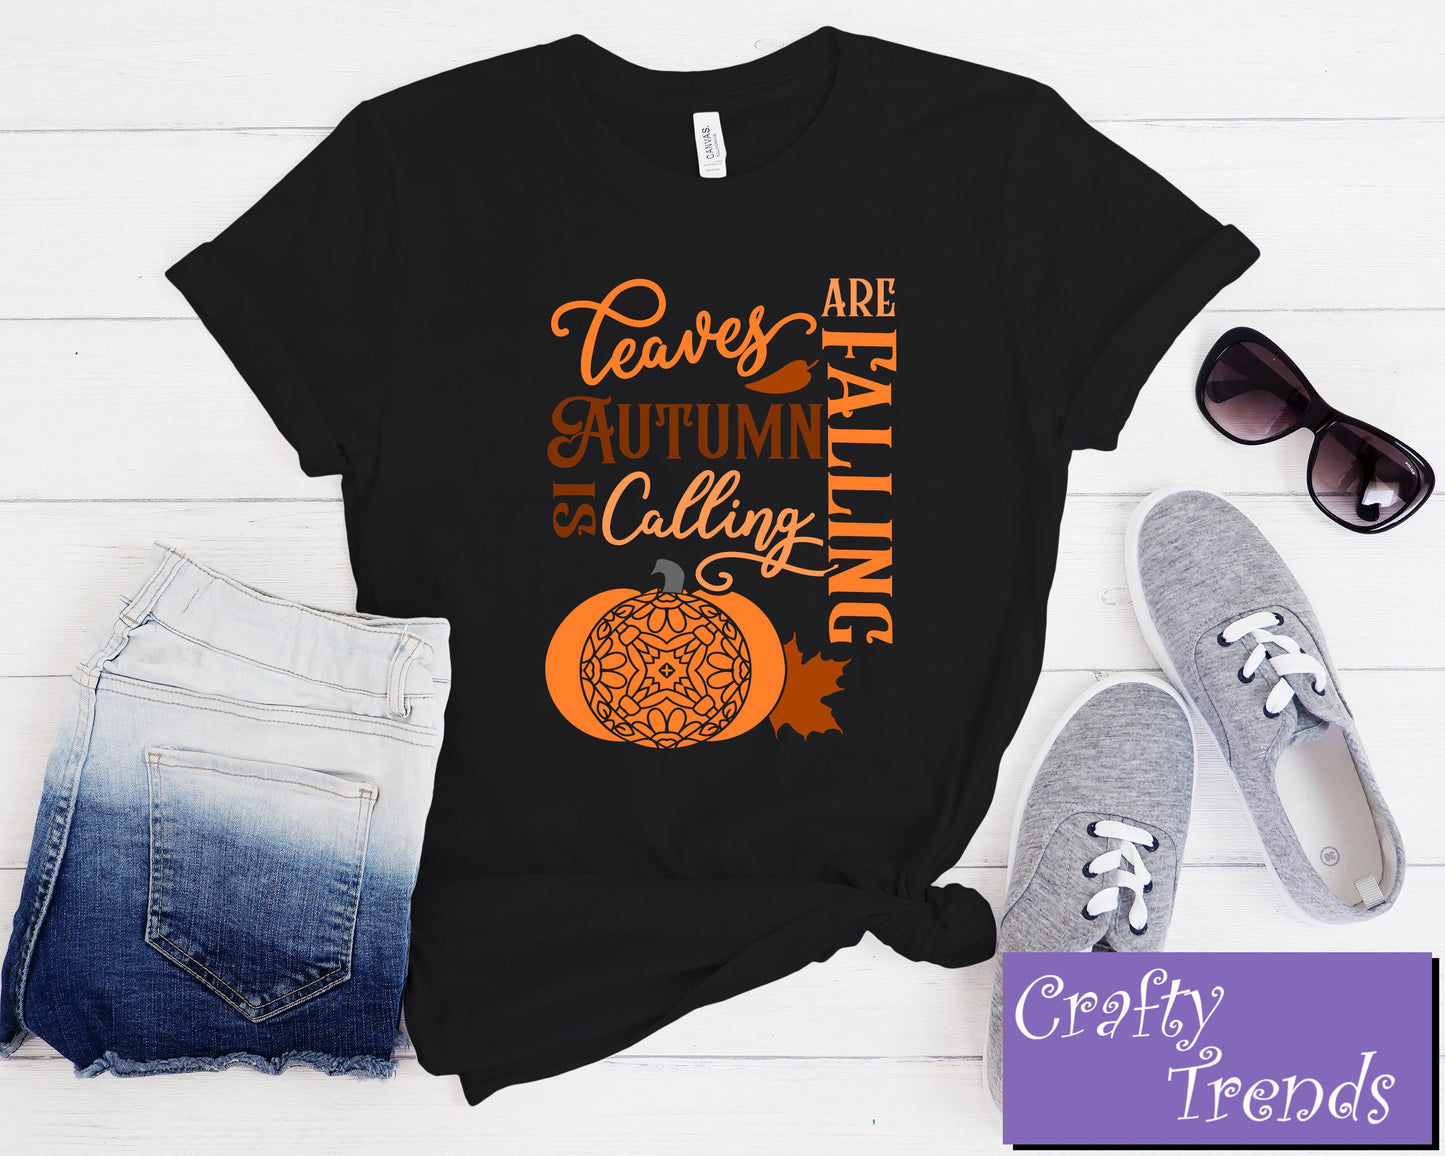 Fall Shirt Graphic Design Leaves Are Falling Autumn Is Calling,Fall Shirt,Autumn Shirt,Pumpkin Shirt,Fall Leaves Shirt